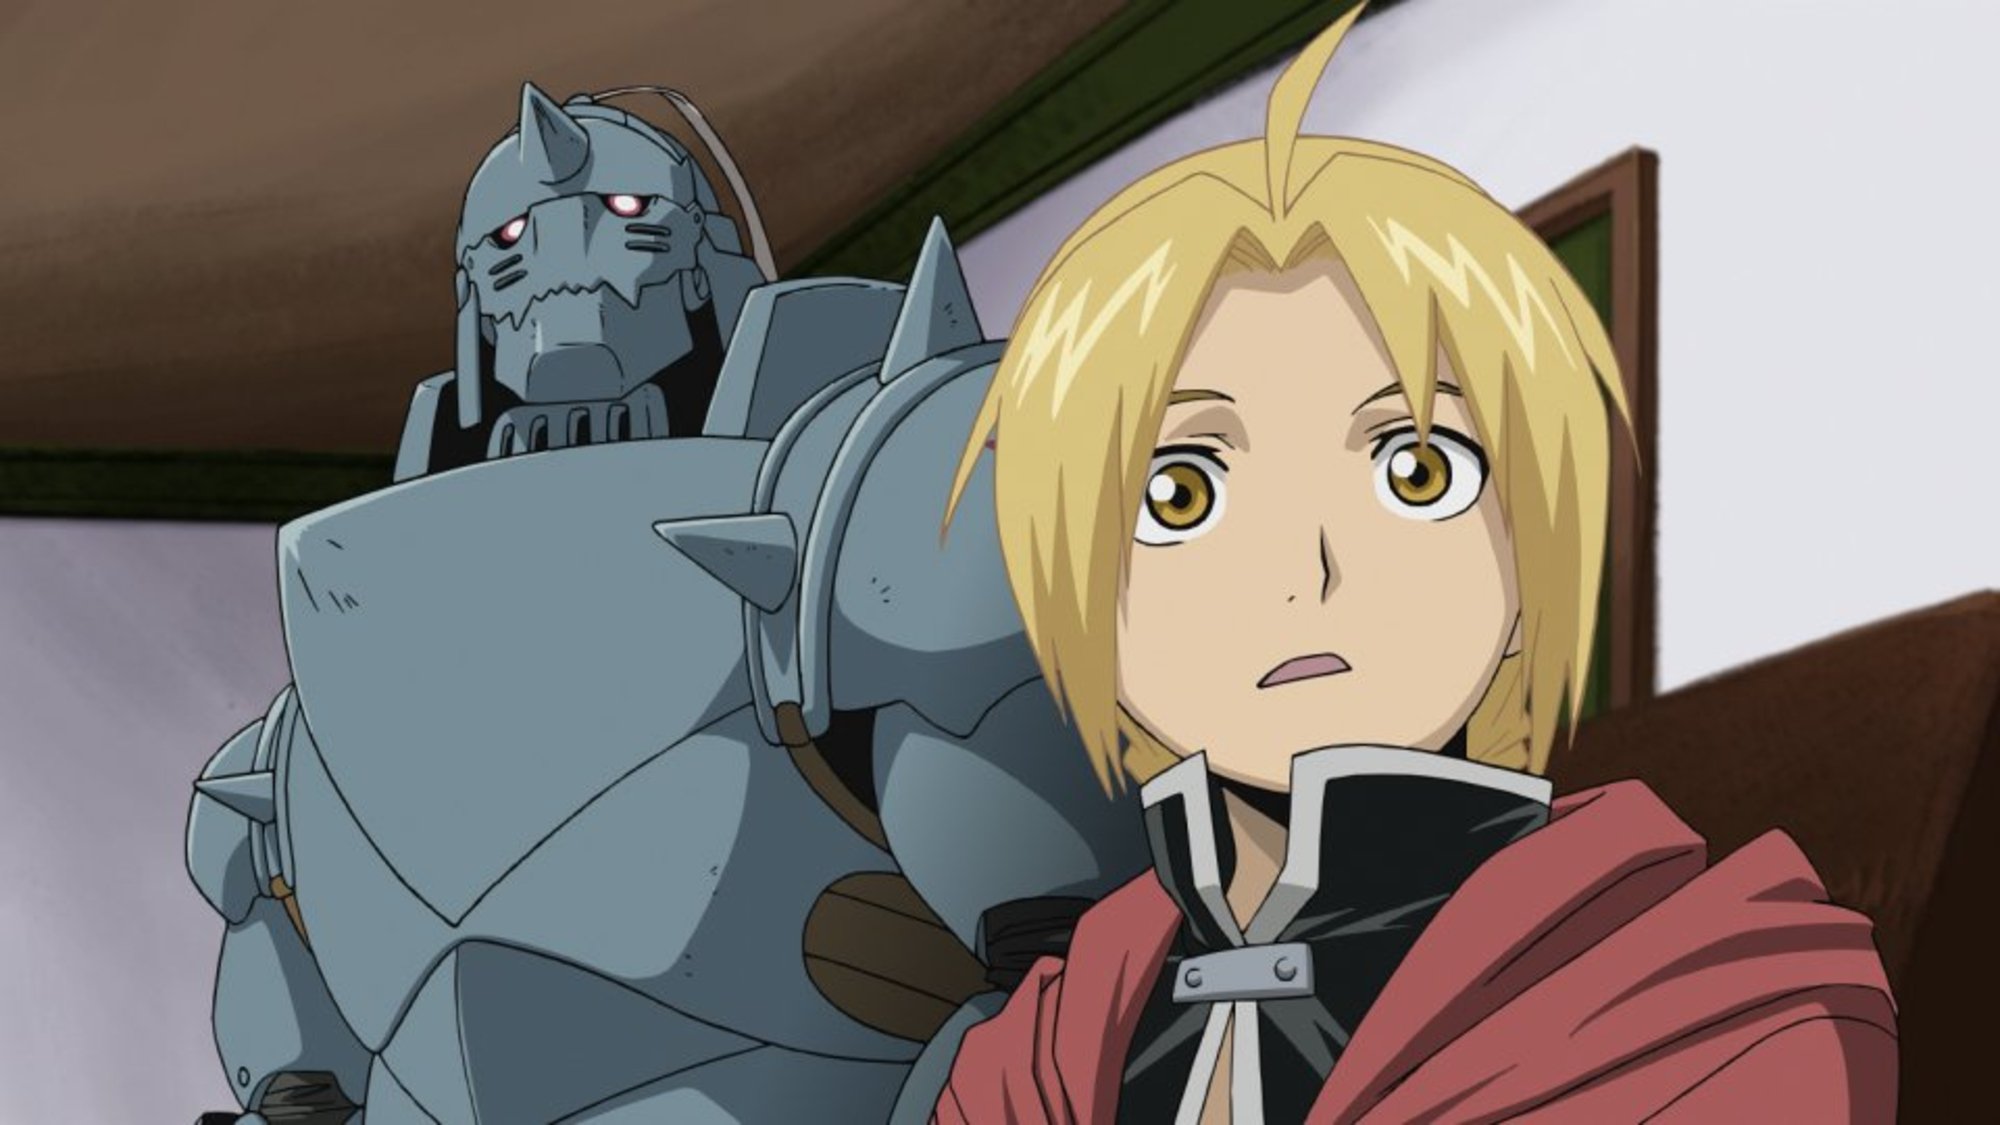 Fullmetal Alchemist And Brotherhood Do You Need To Watch 1 Before The Other...